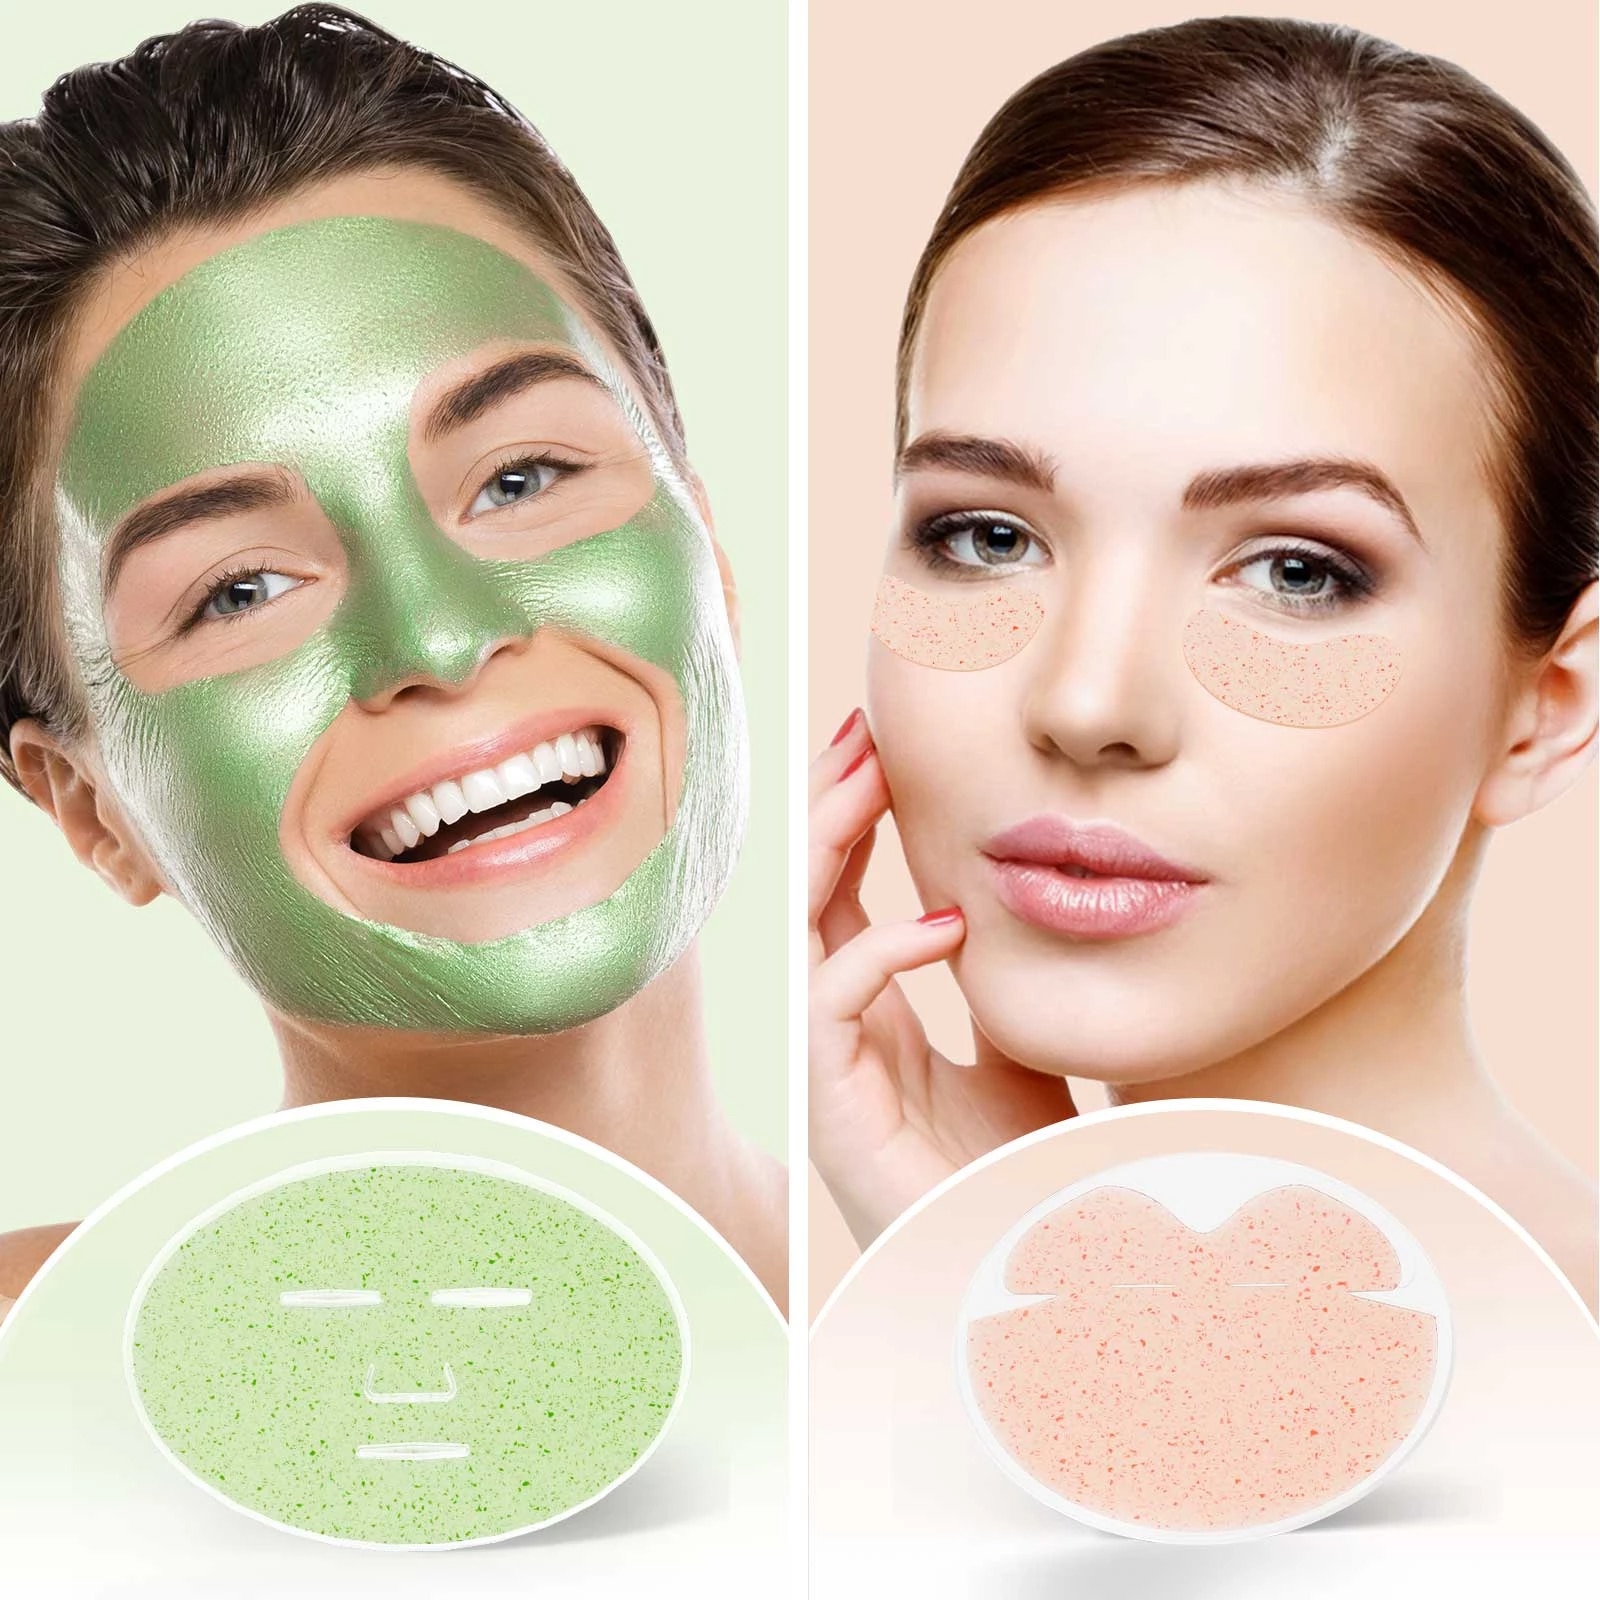 Face Mask Maker Automatic DIY Fruit Natural Vegetable Collagen Mask Smart Touch Screen Salon SPA Skin Care Homeuse Beauty Device